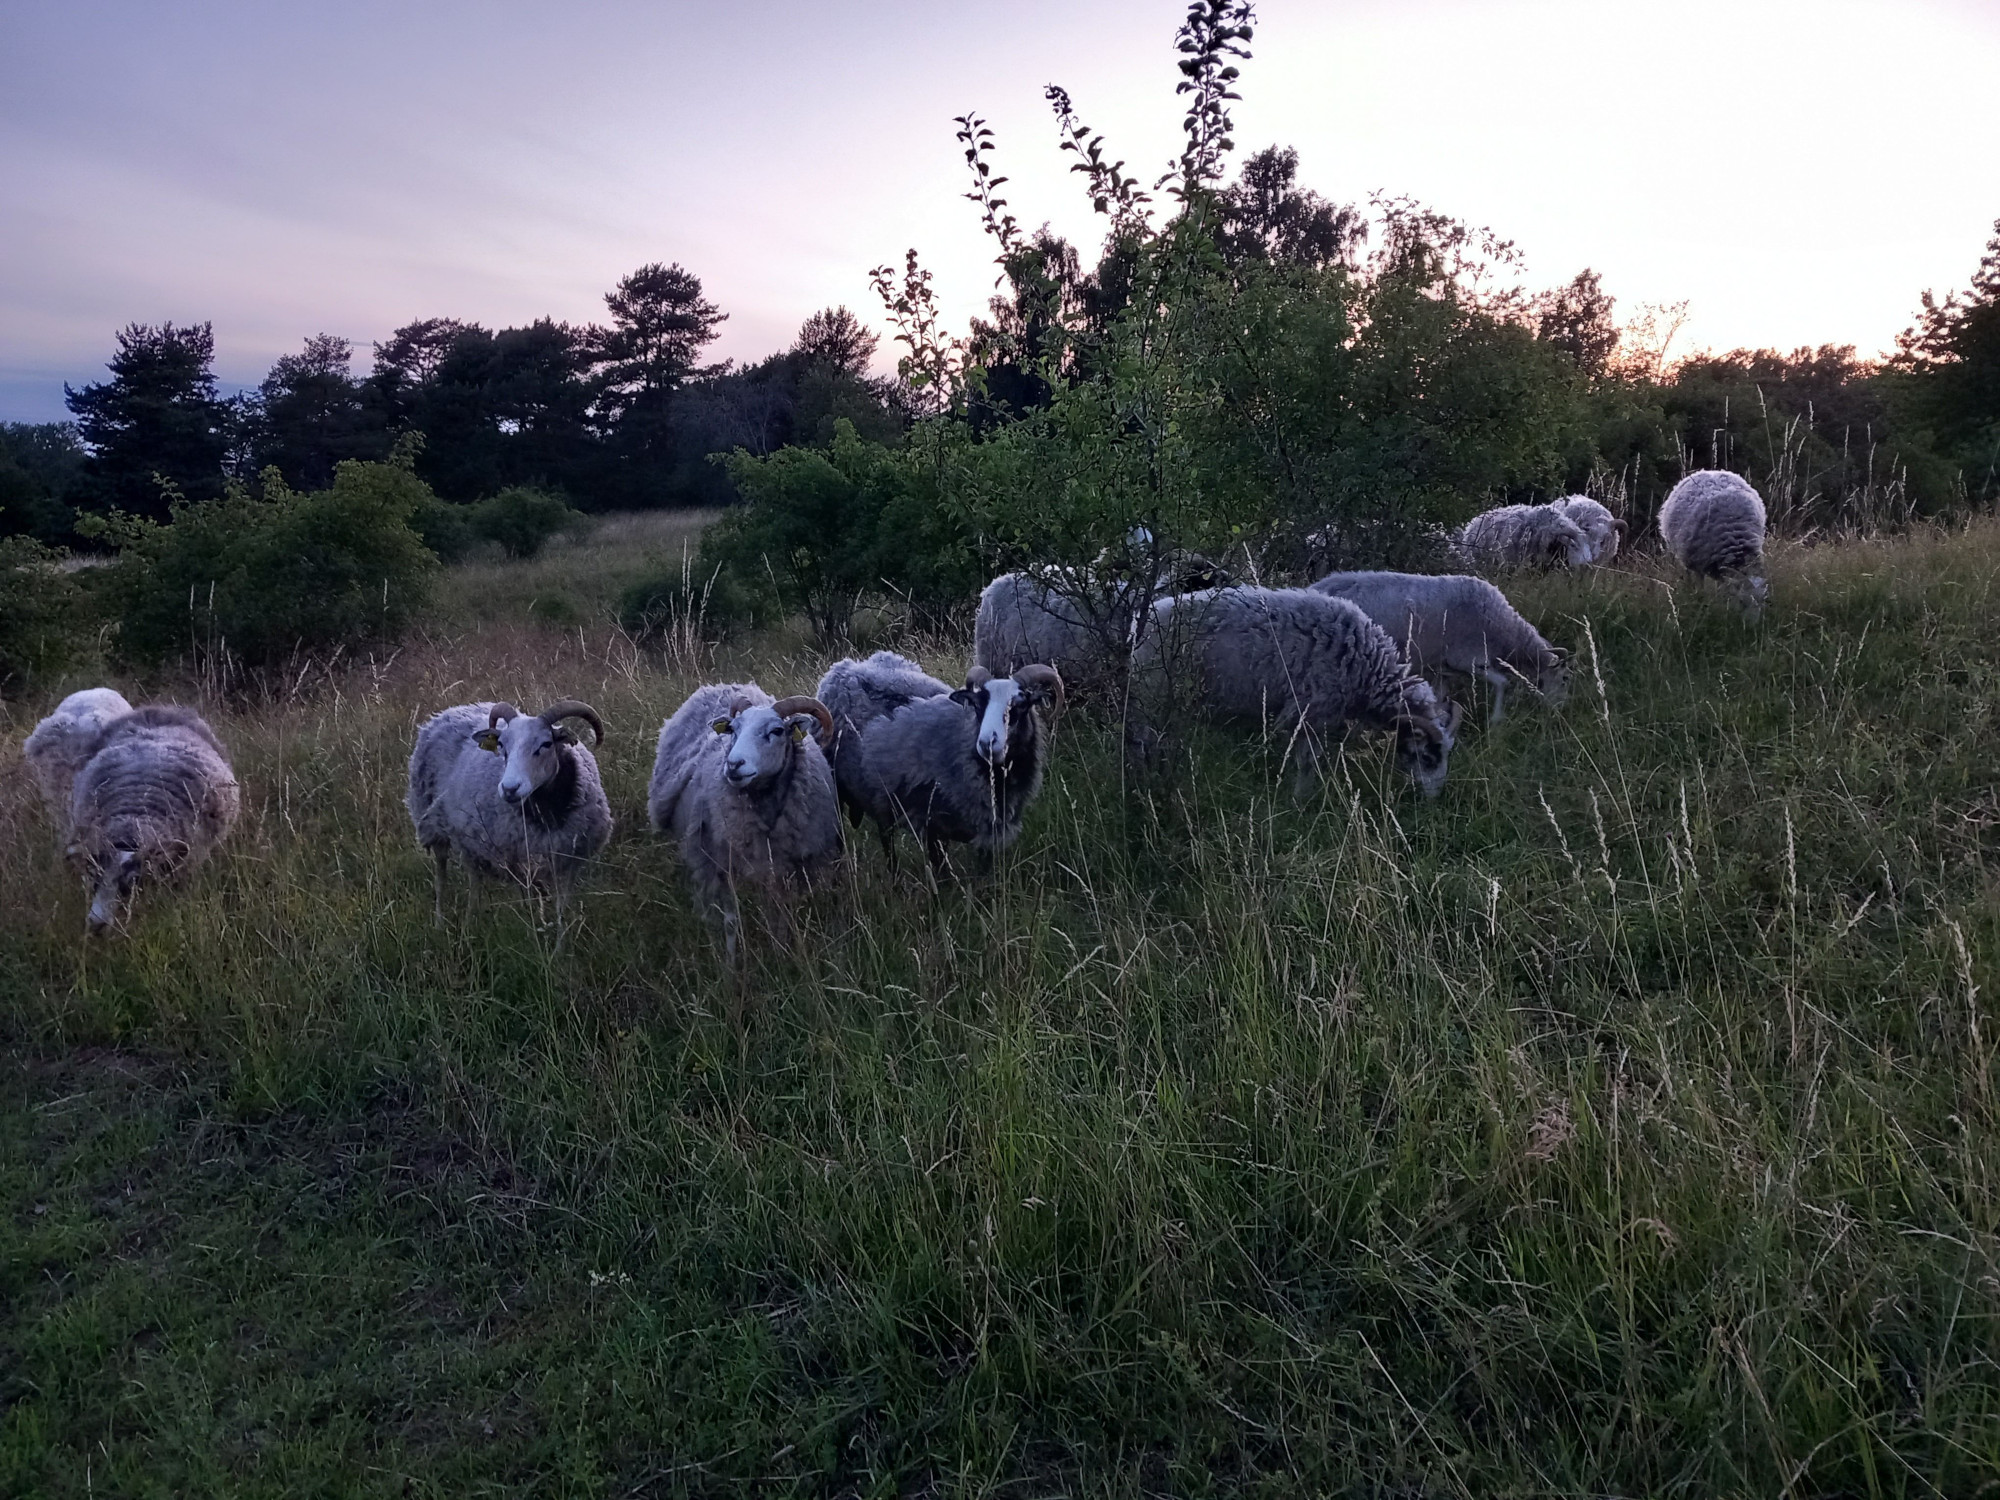 A group of Gute sheep looking curious in the evening. (Photo: Martin Johnsson. License: cc-by 4.0)